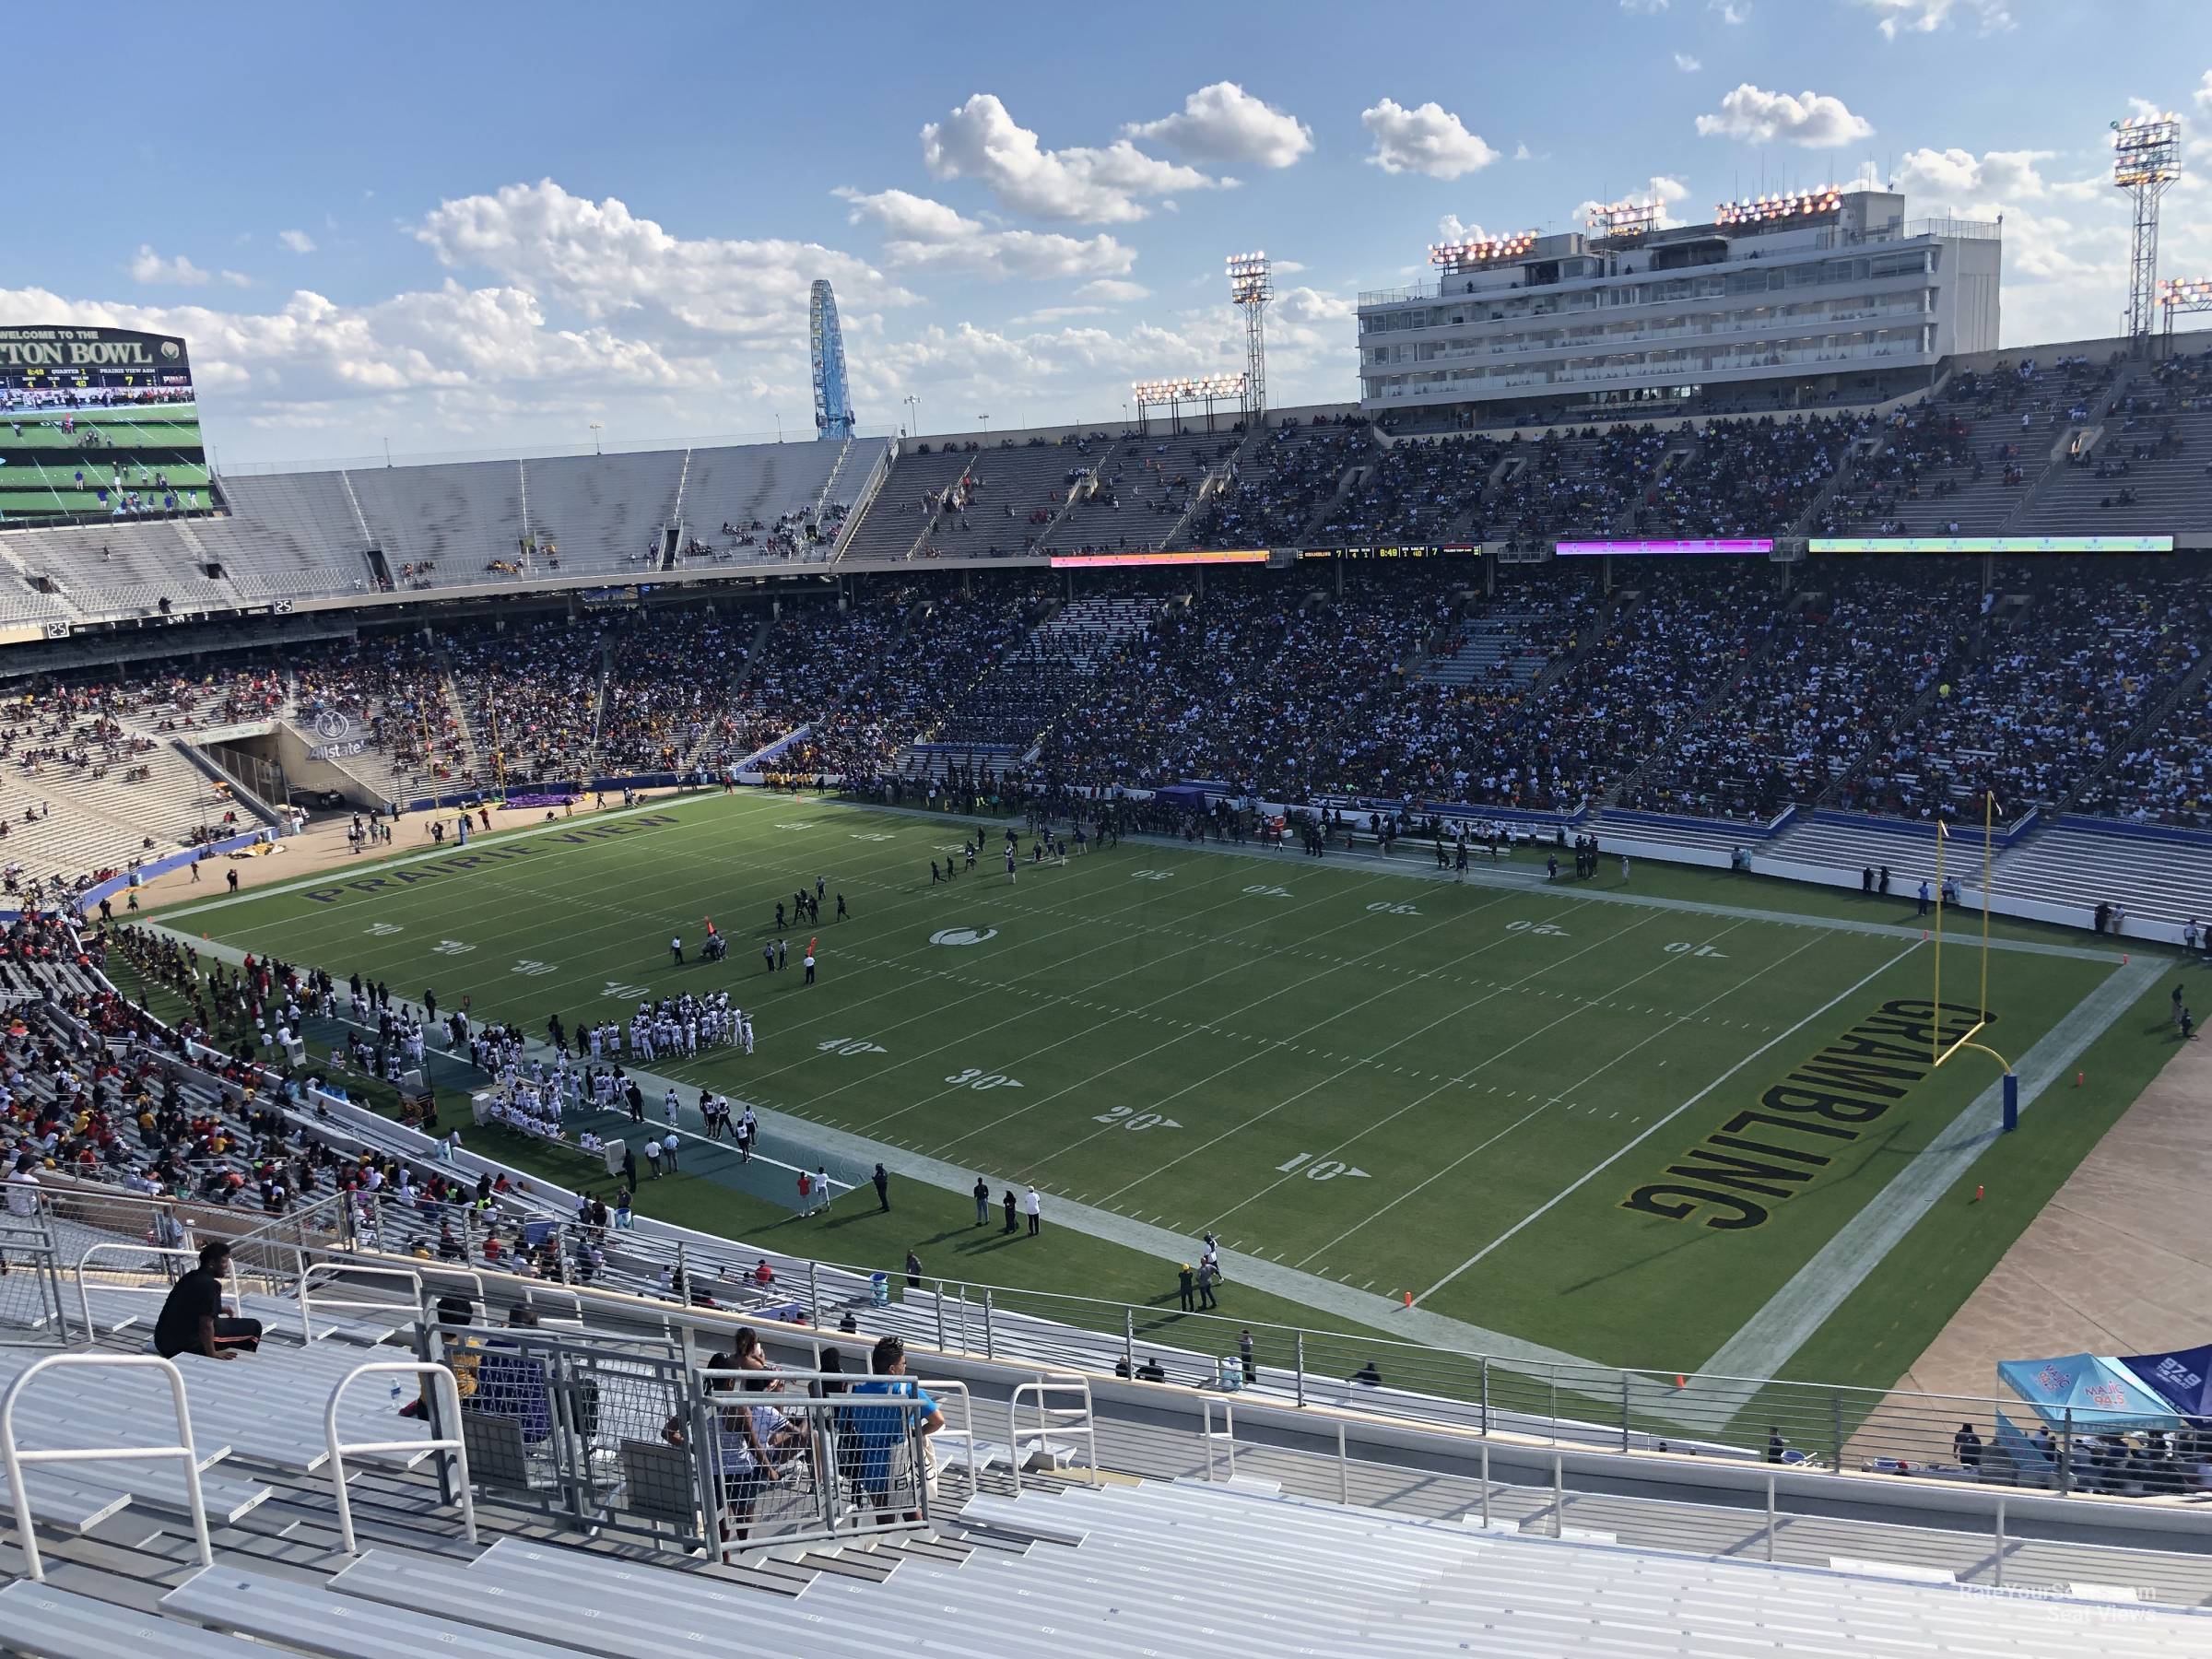 Section 122 at Cotton Bowl